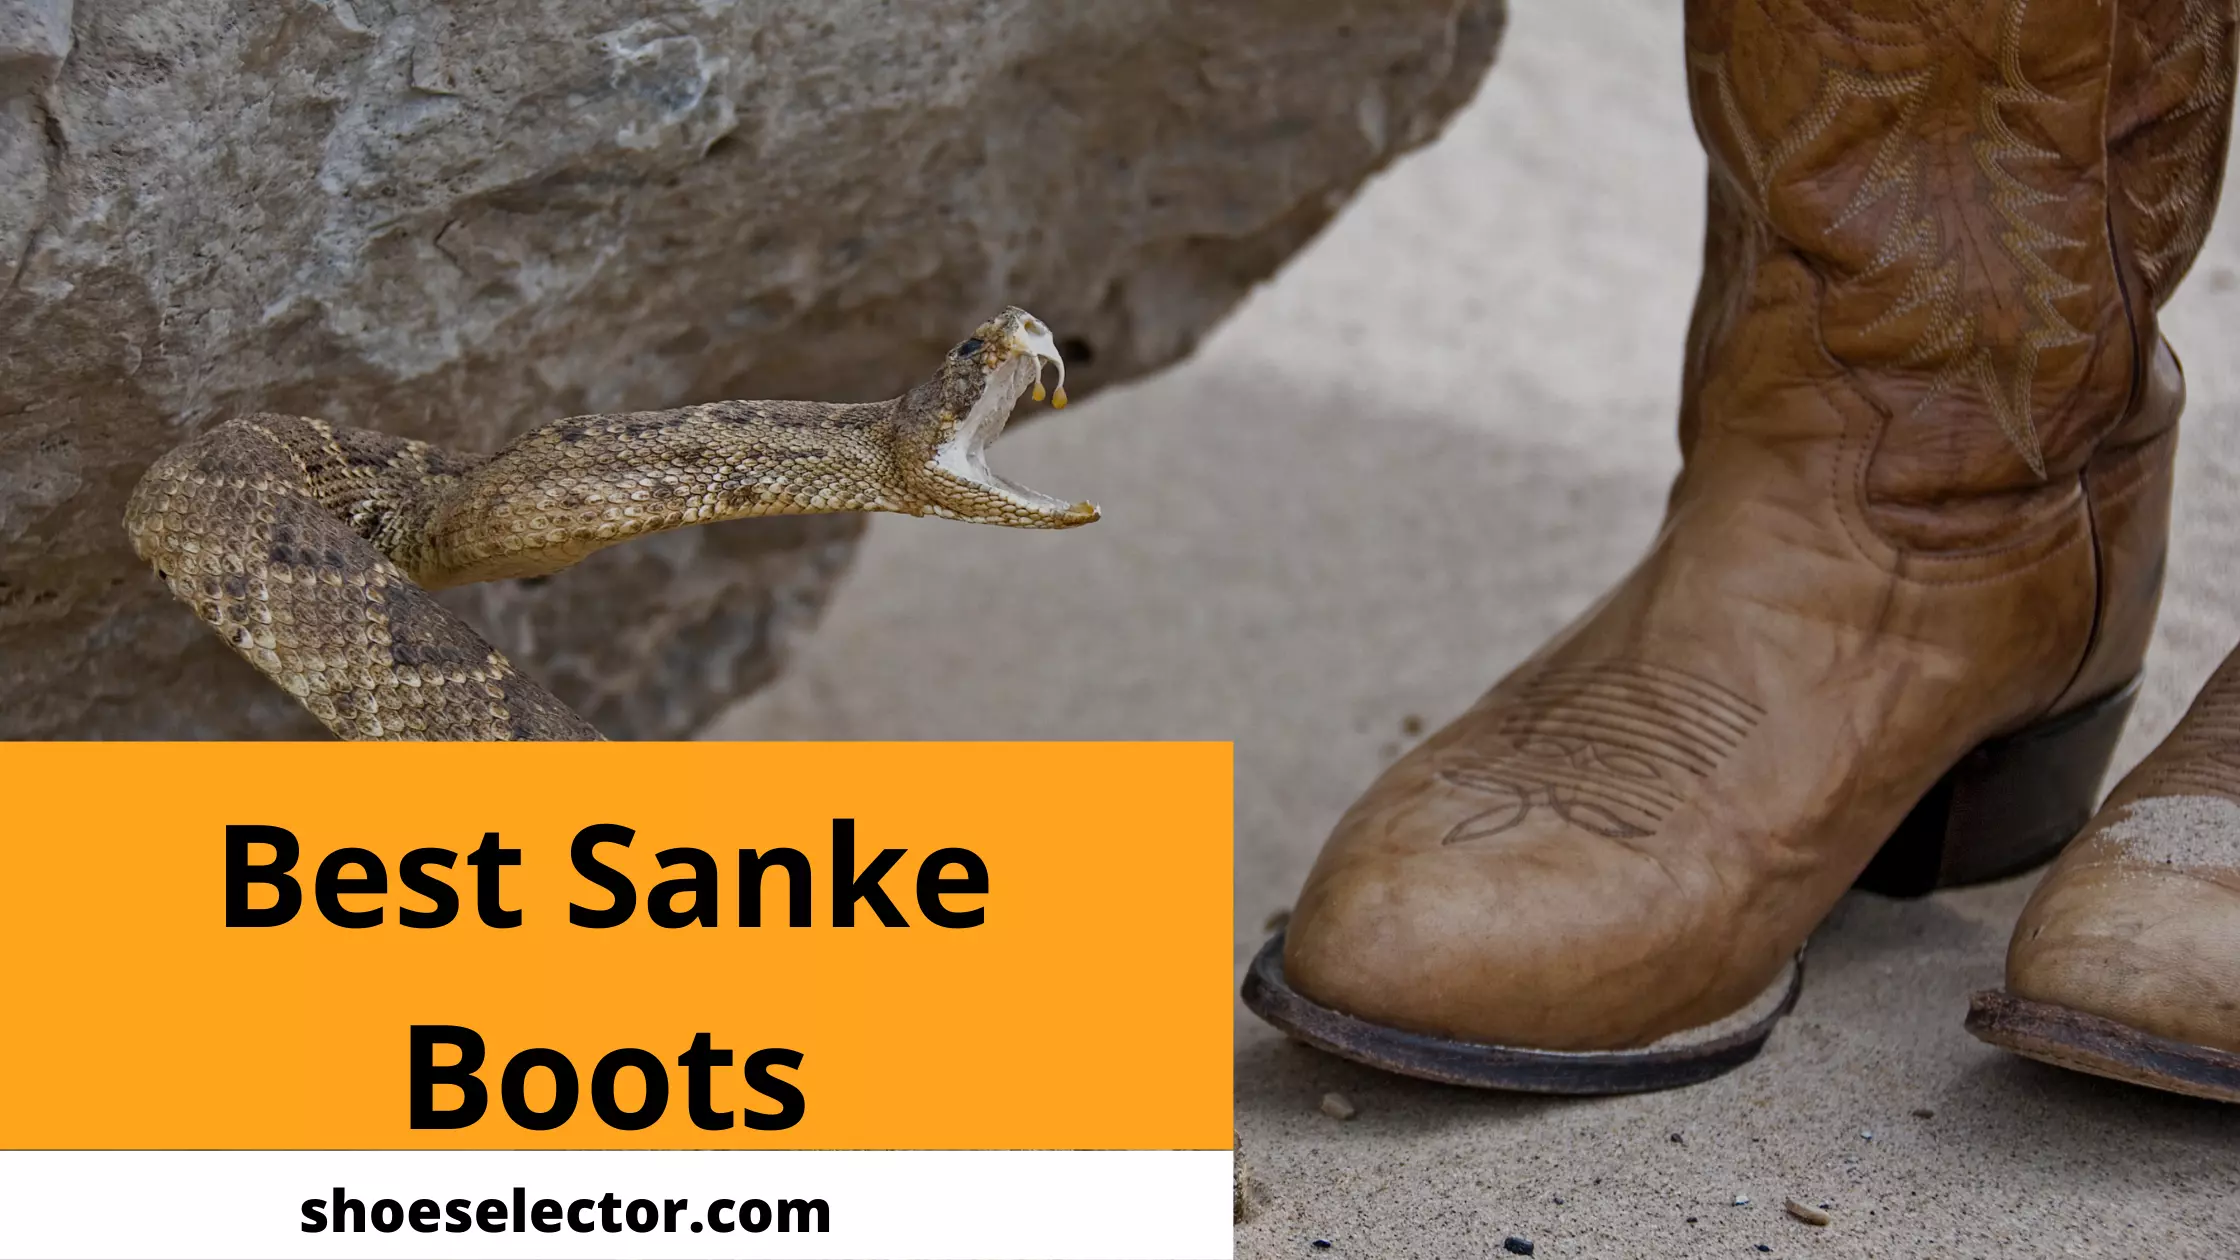 10 Best Snake Boots Reviews [REVEALED Top Rated for 2022]